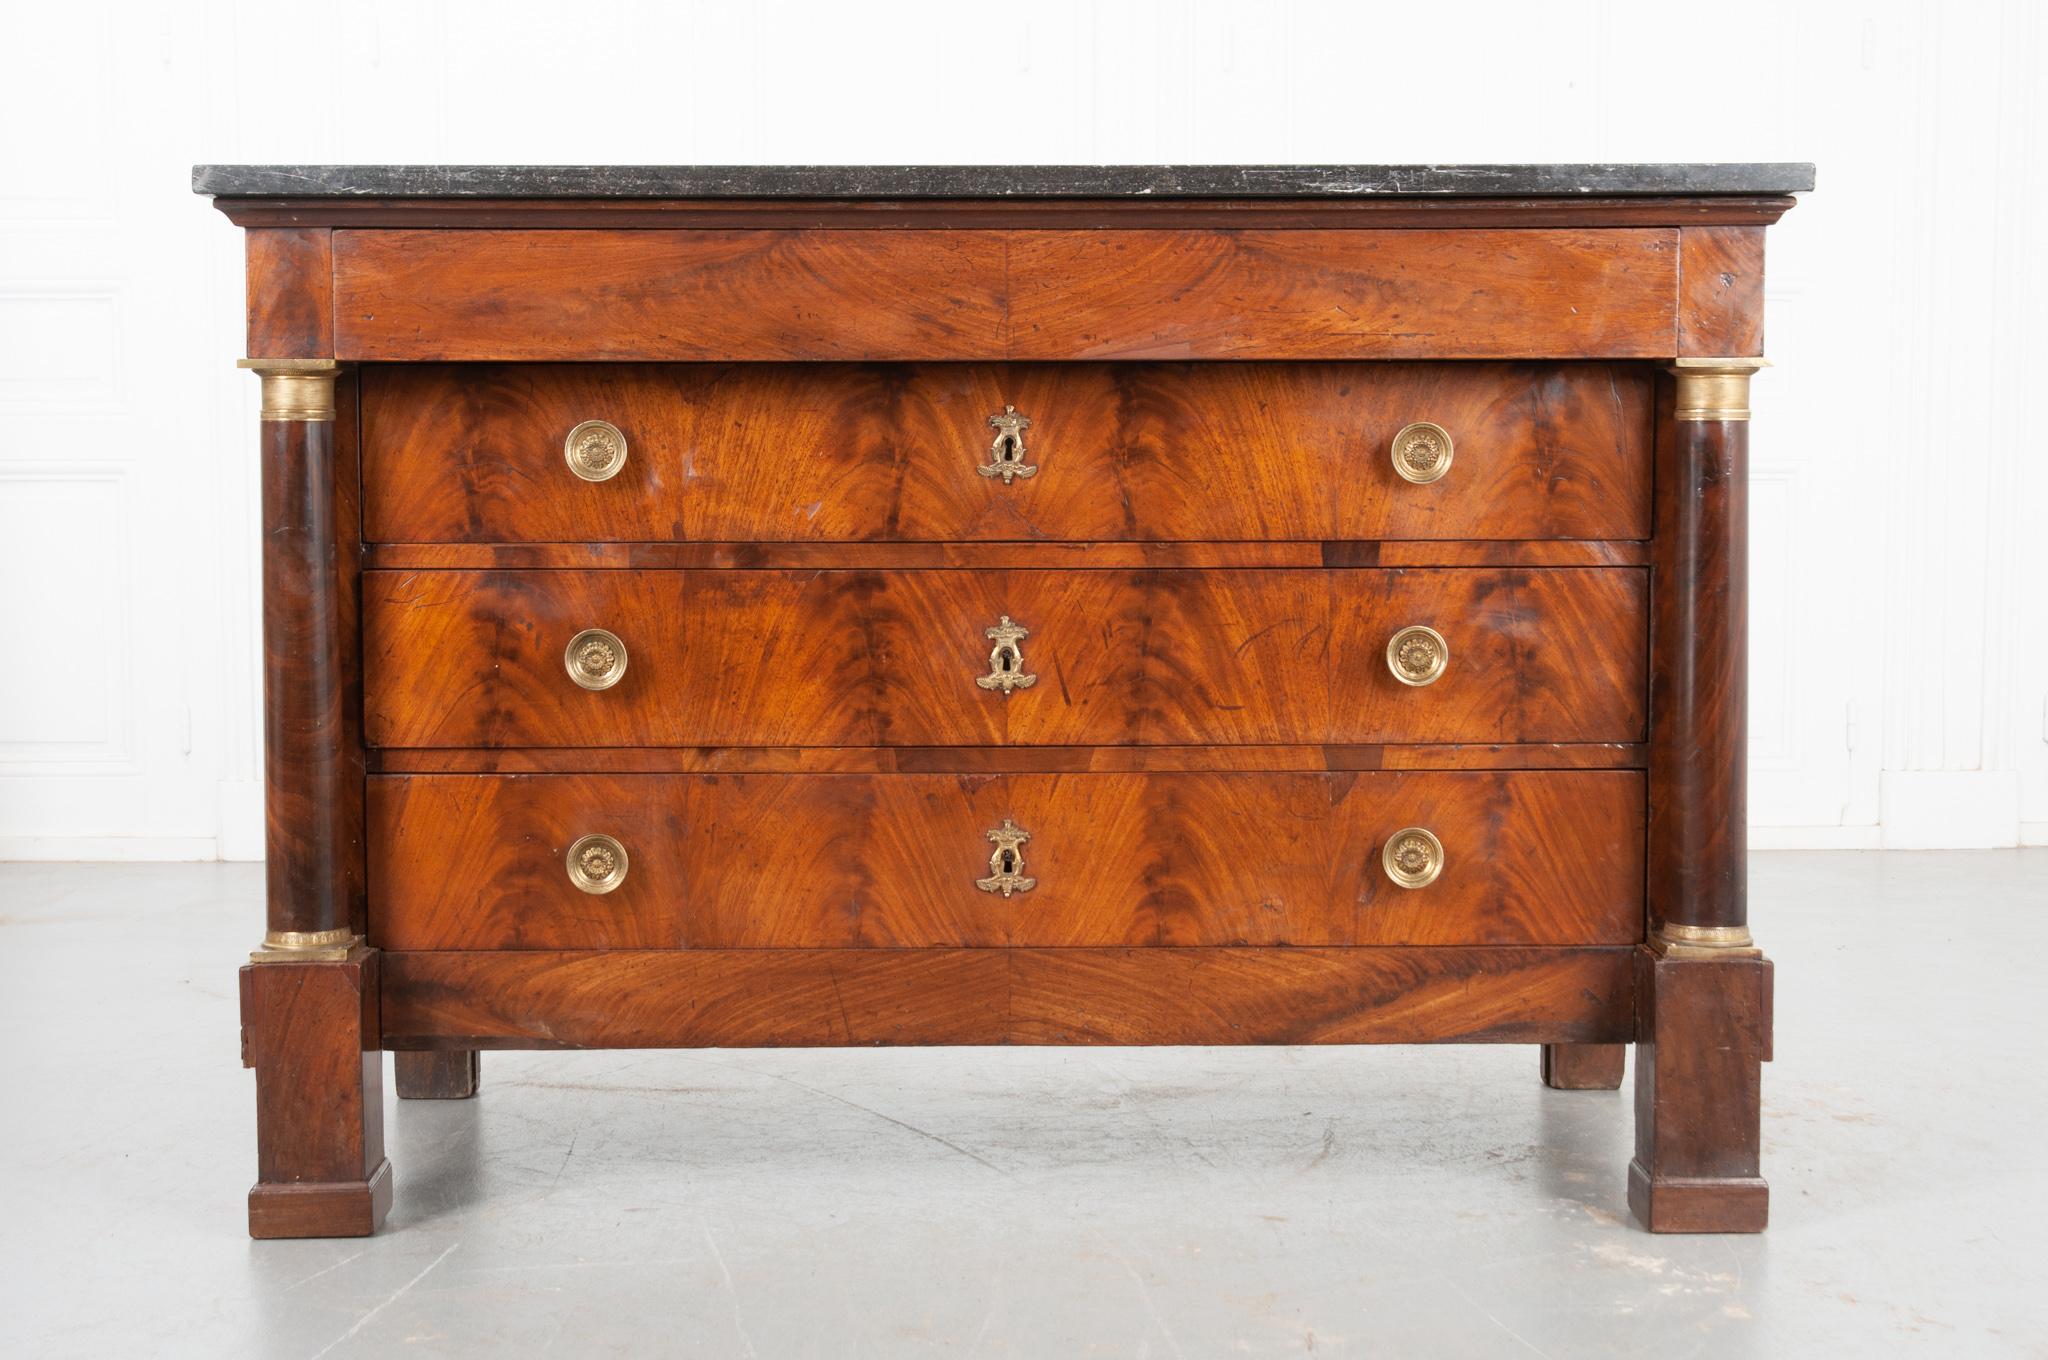 Four total drawers compose this dignified Empirically-styled mahogany commode. This case piece is topped in black / charcoal-colored fossil marble that, along with the body, has patinated wonderfully over the decades. A hidden drawer, free of any